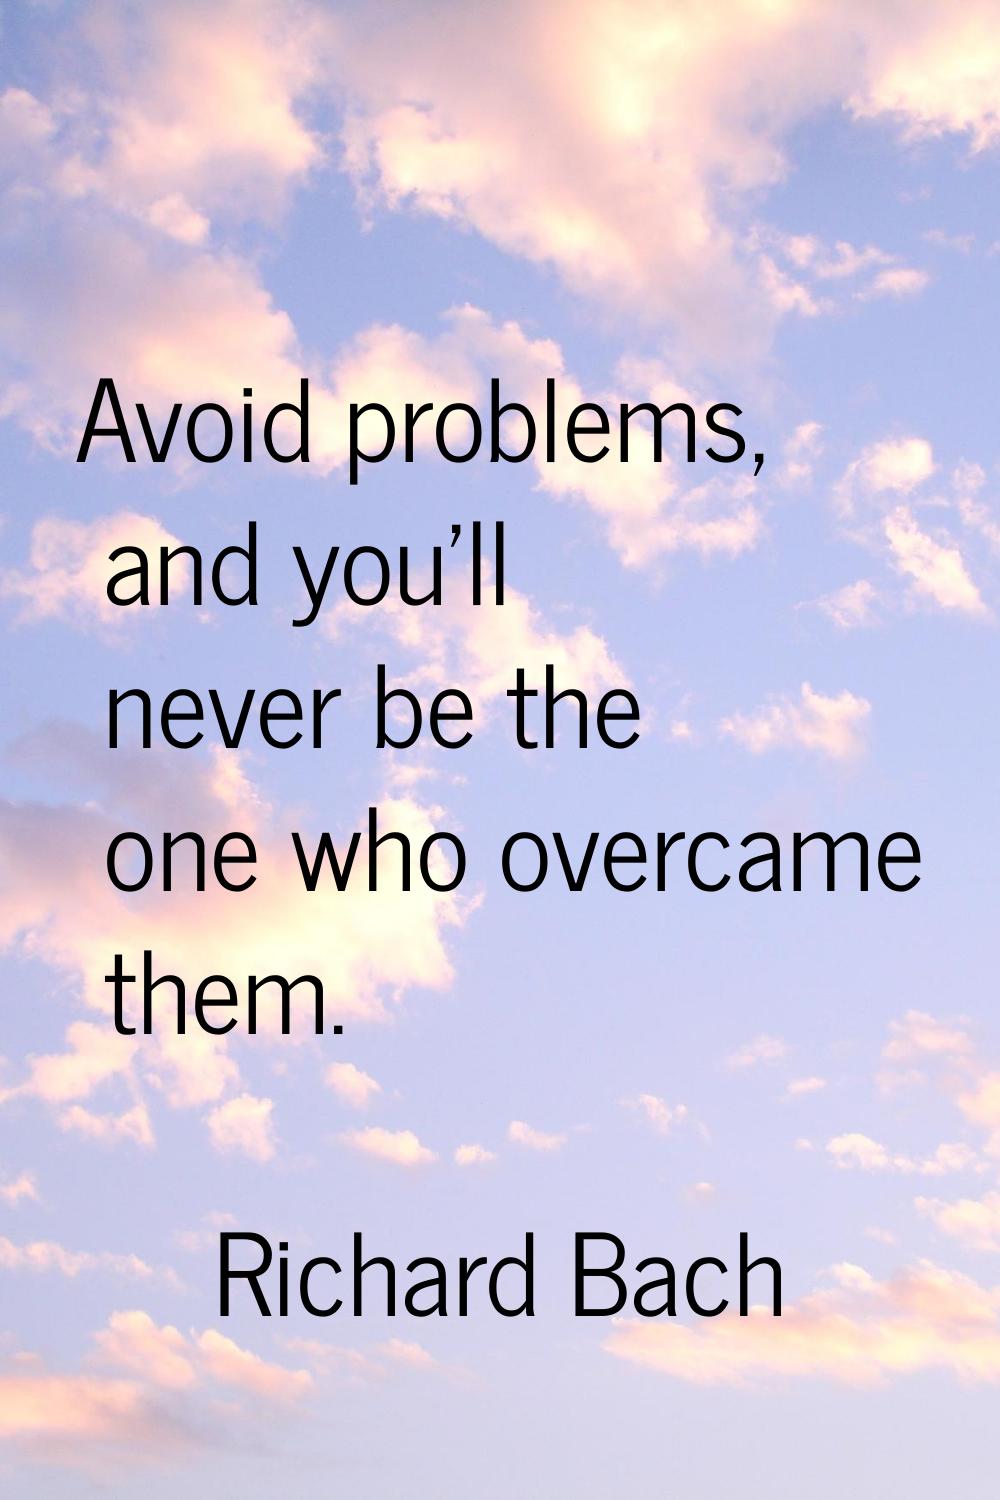 Avoid problems, and you'll never be the one who overcame them.